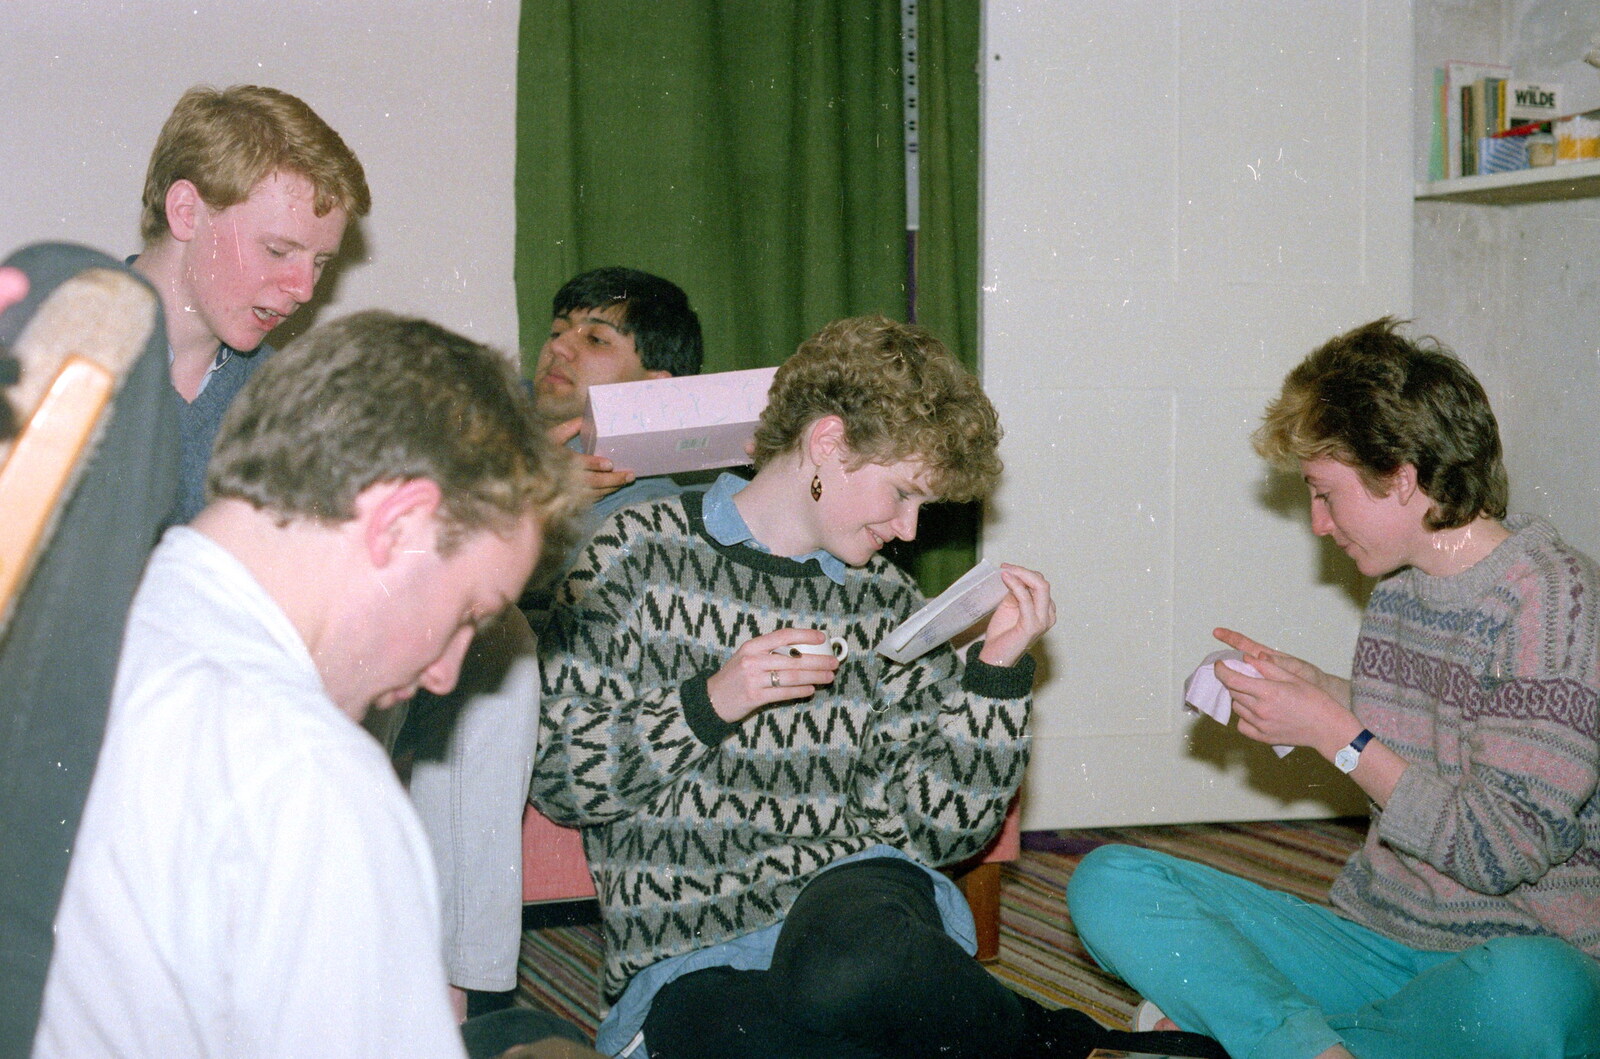 The Psychology Massive mess around from Uni: A Night In The Bank and Fly Magazine, Plymouth Polytechnic, Devon - March 10th 1986